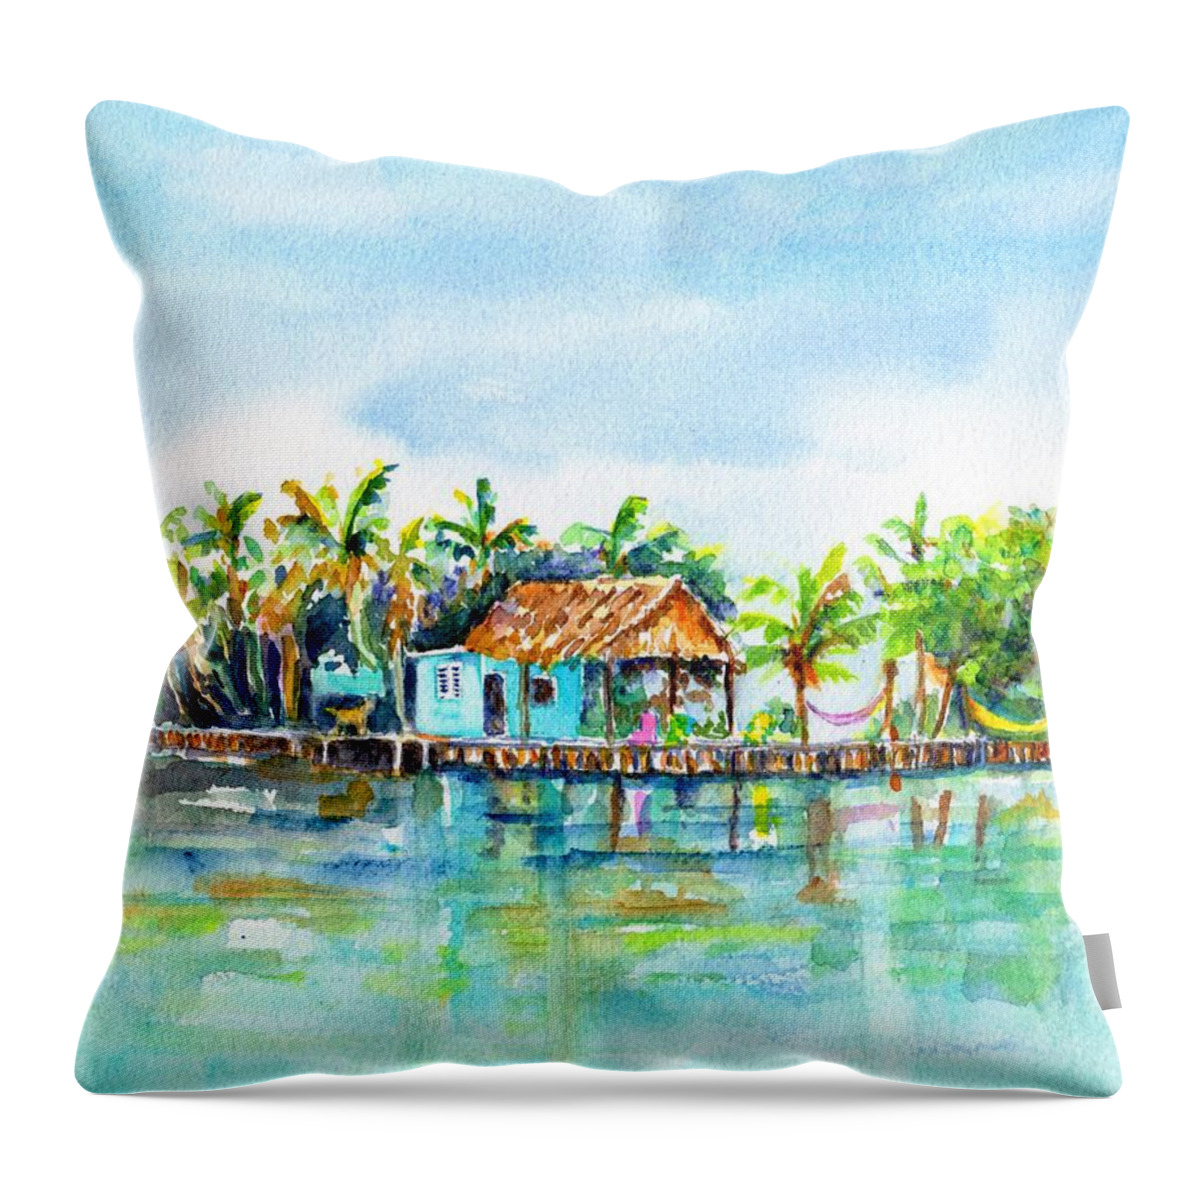 Belize Throw Pillow featuring the painting Bread and Butter Caye Belize by Carlin Blahnik CarlinArtWatercolor